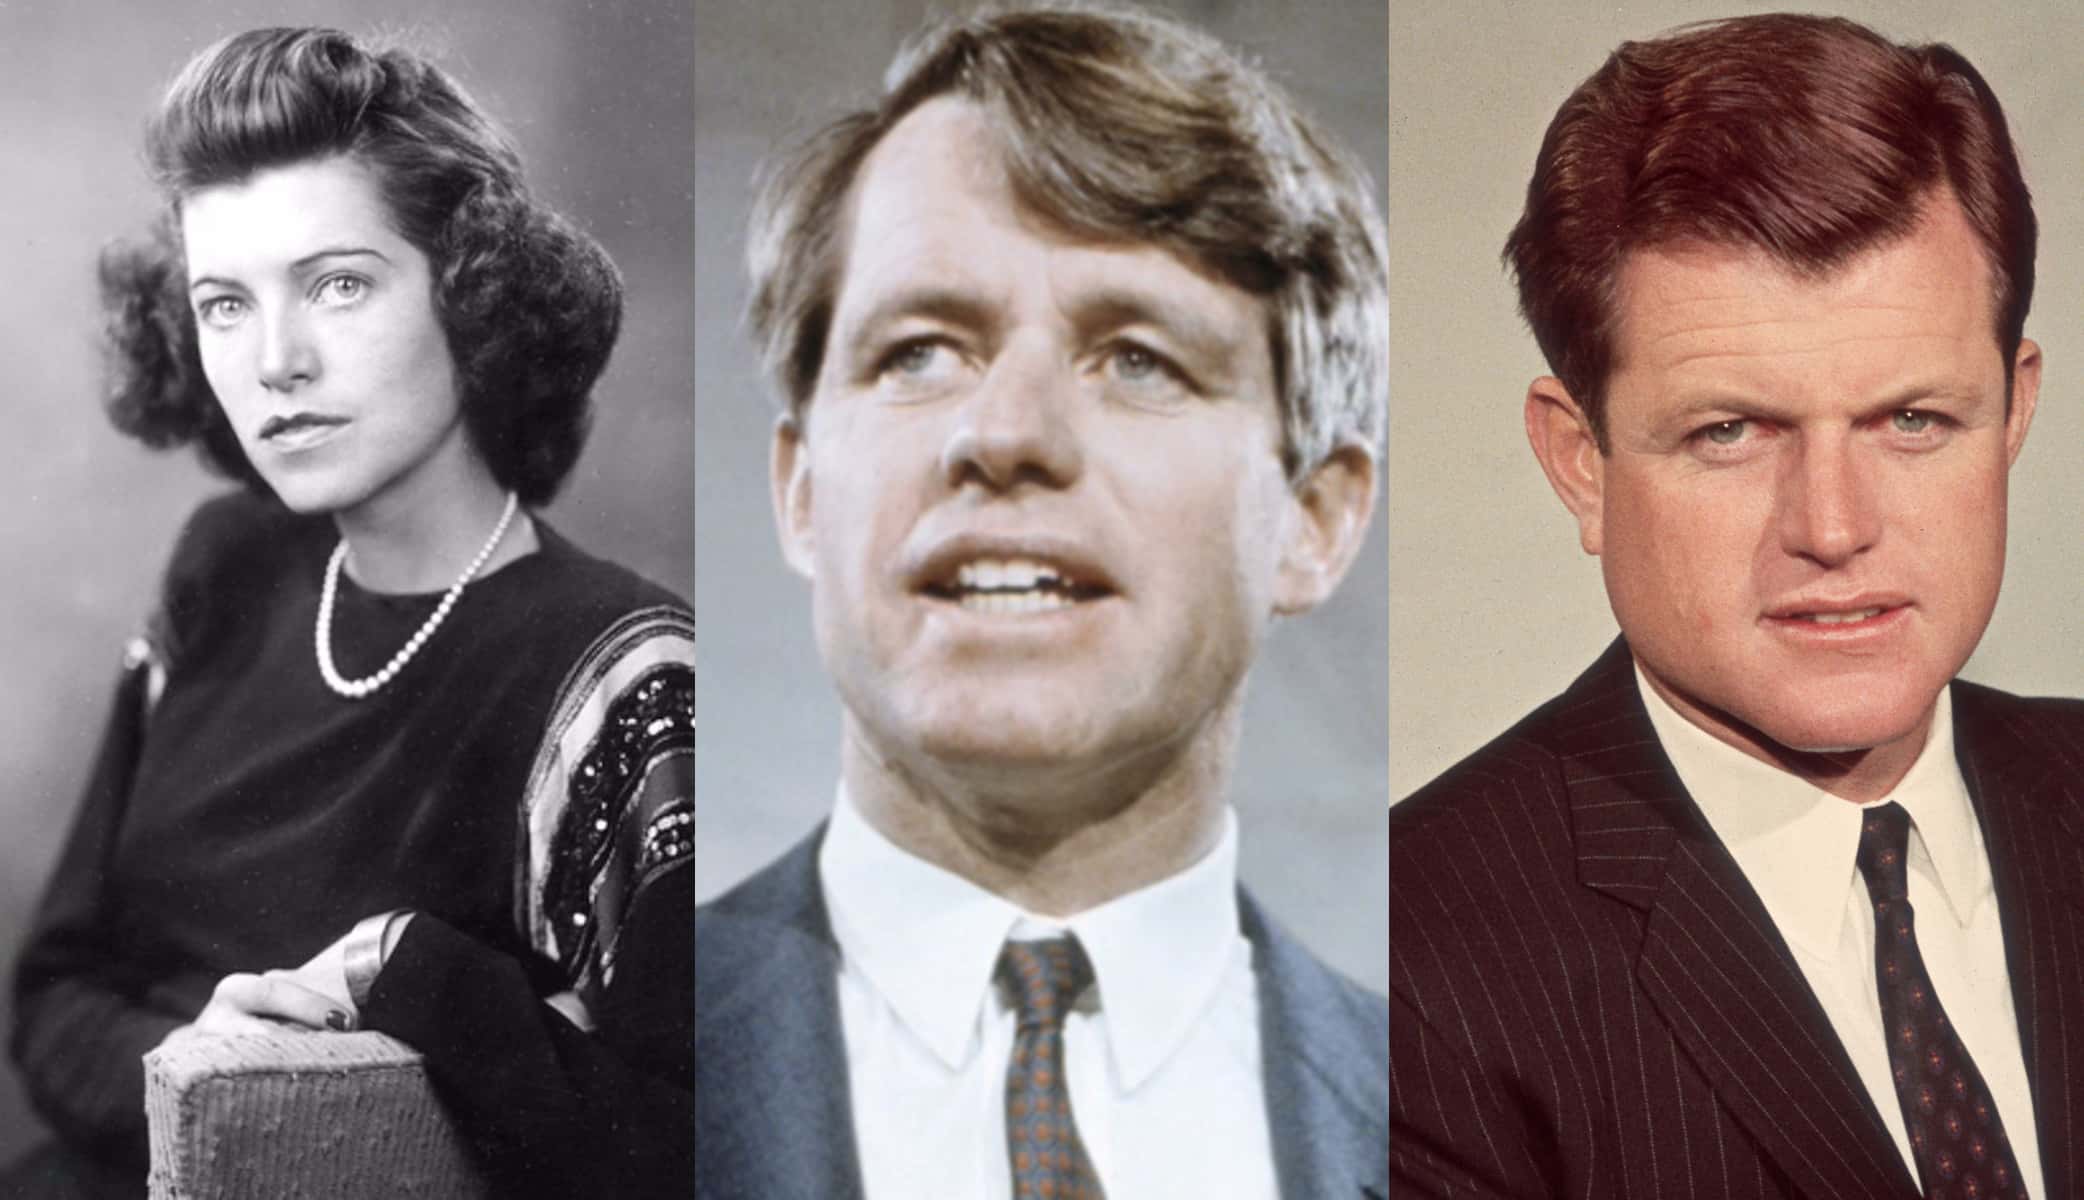 45 Presidential Facts About John F. Kennedy